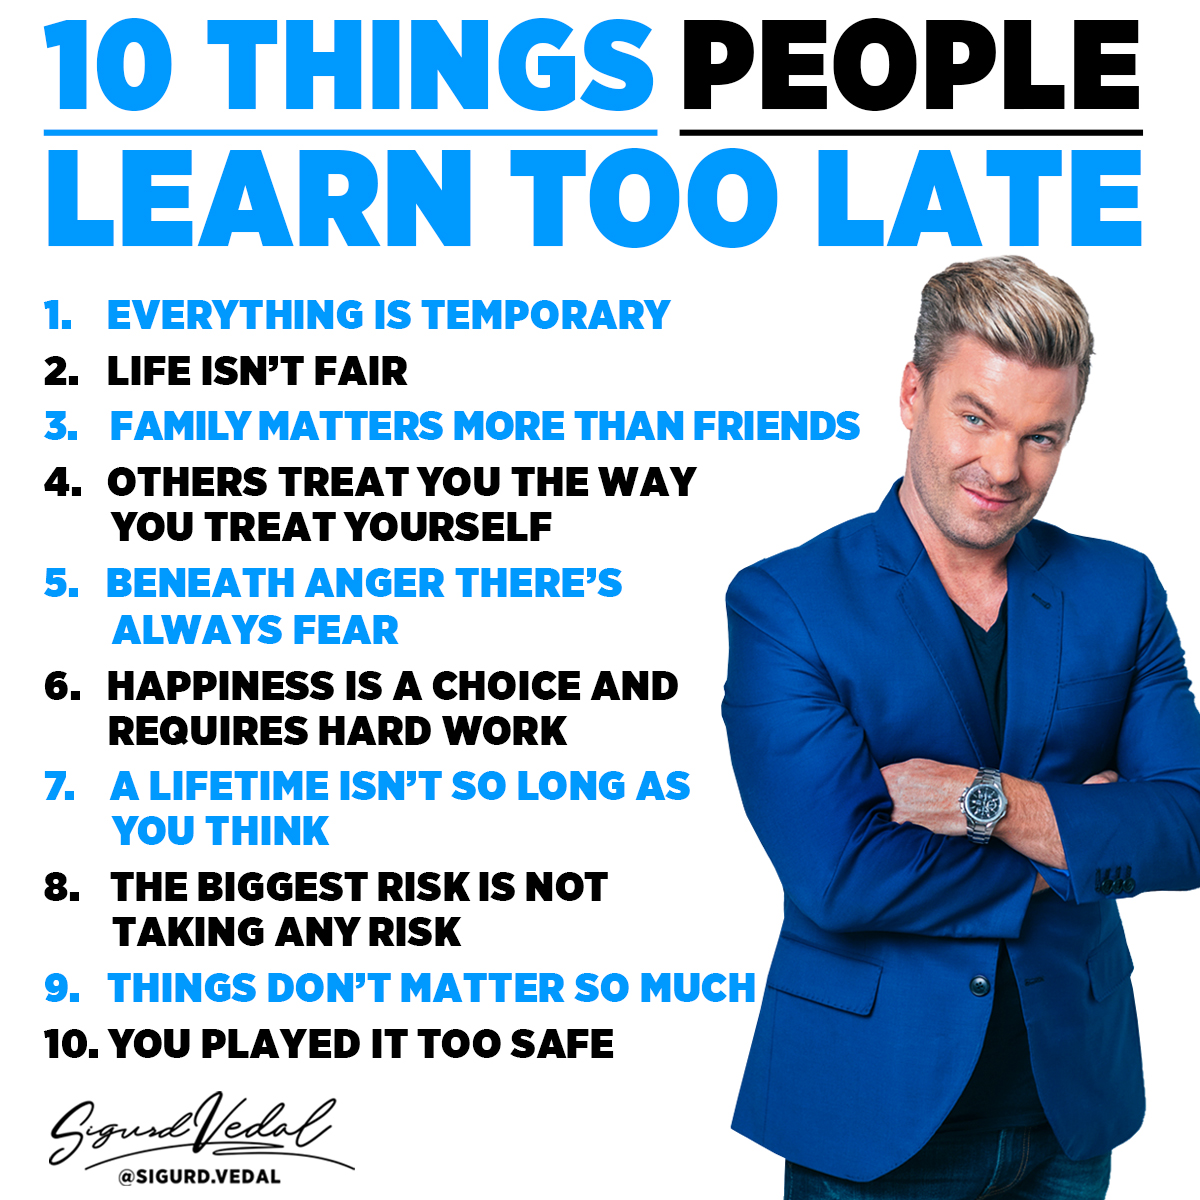 11 Life Lessons You Don't Have to Learn the Hard Way